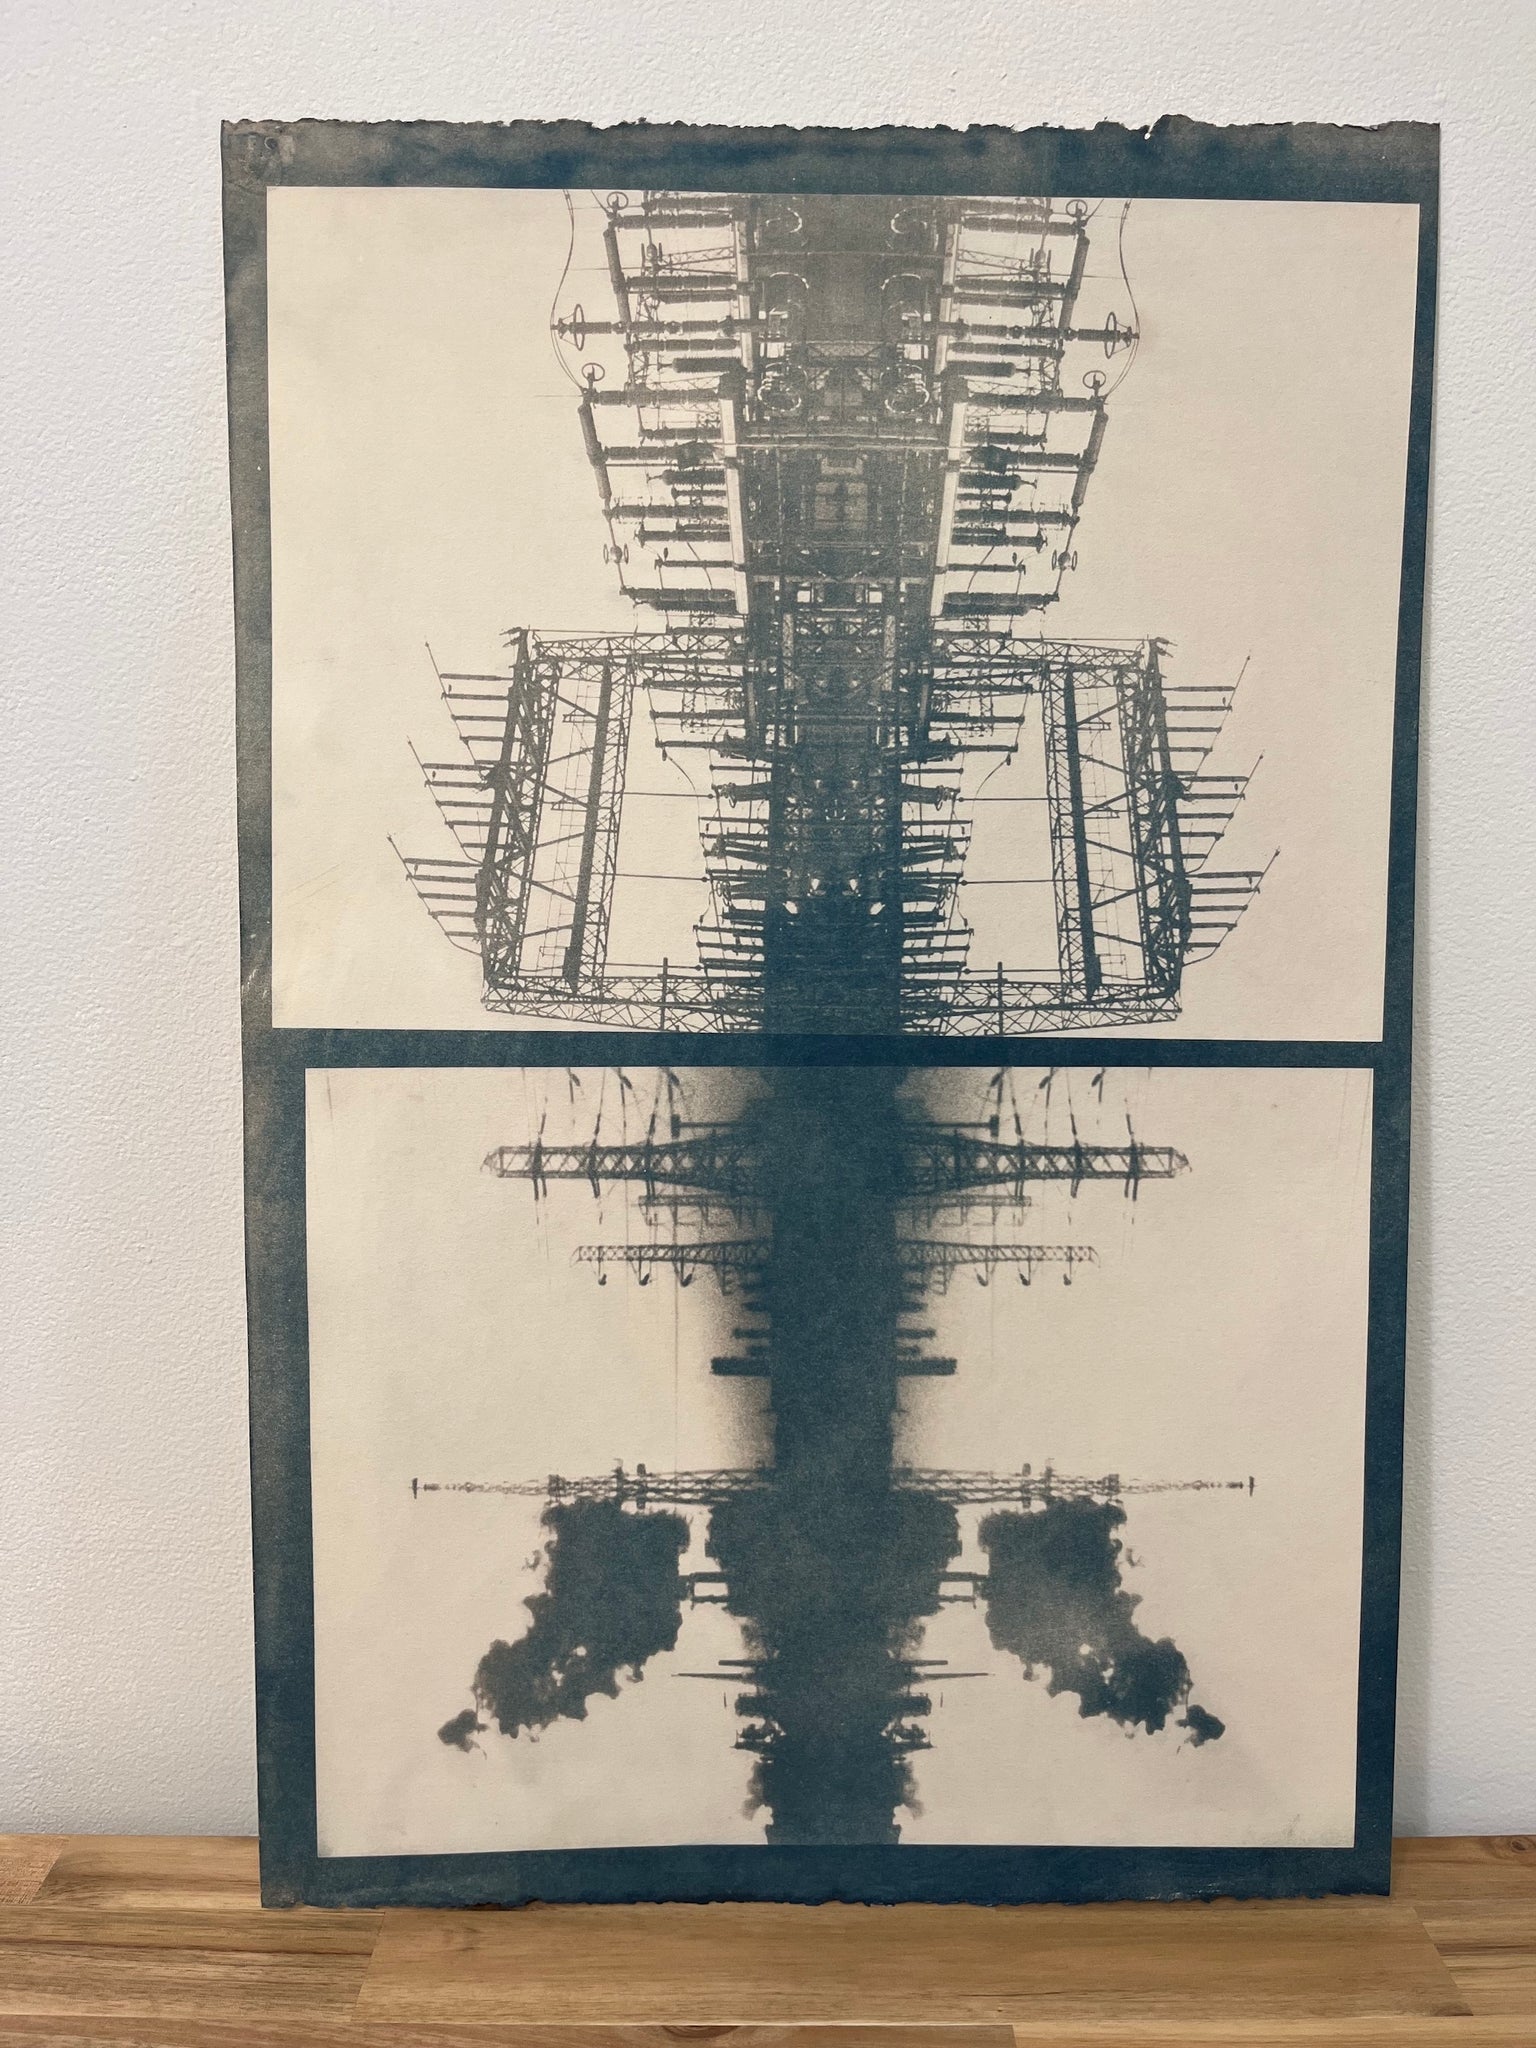 Jo Andres, "Industrial Diptych"